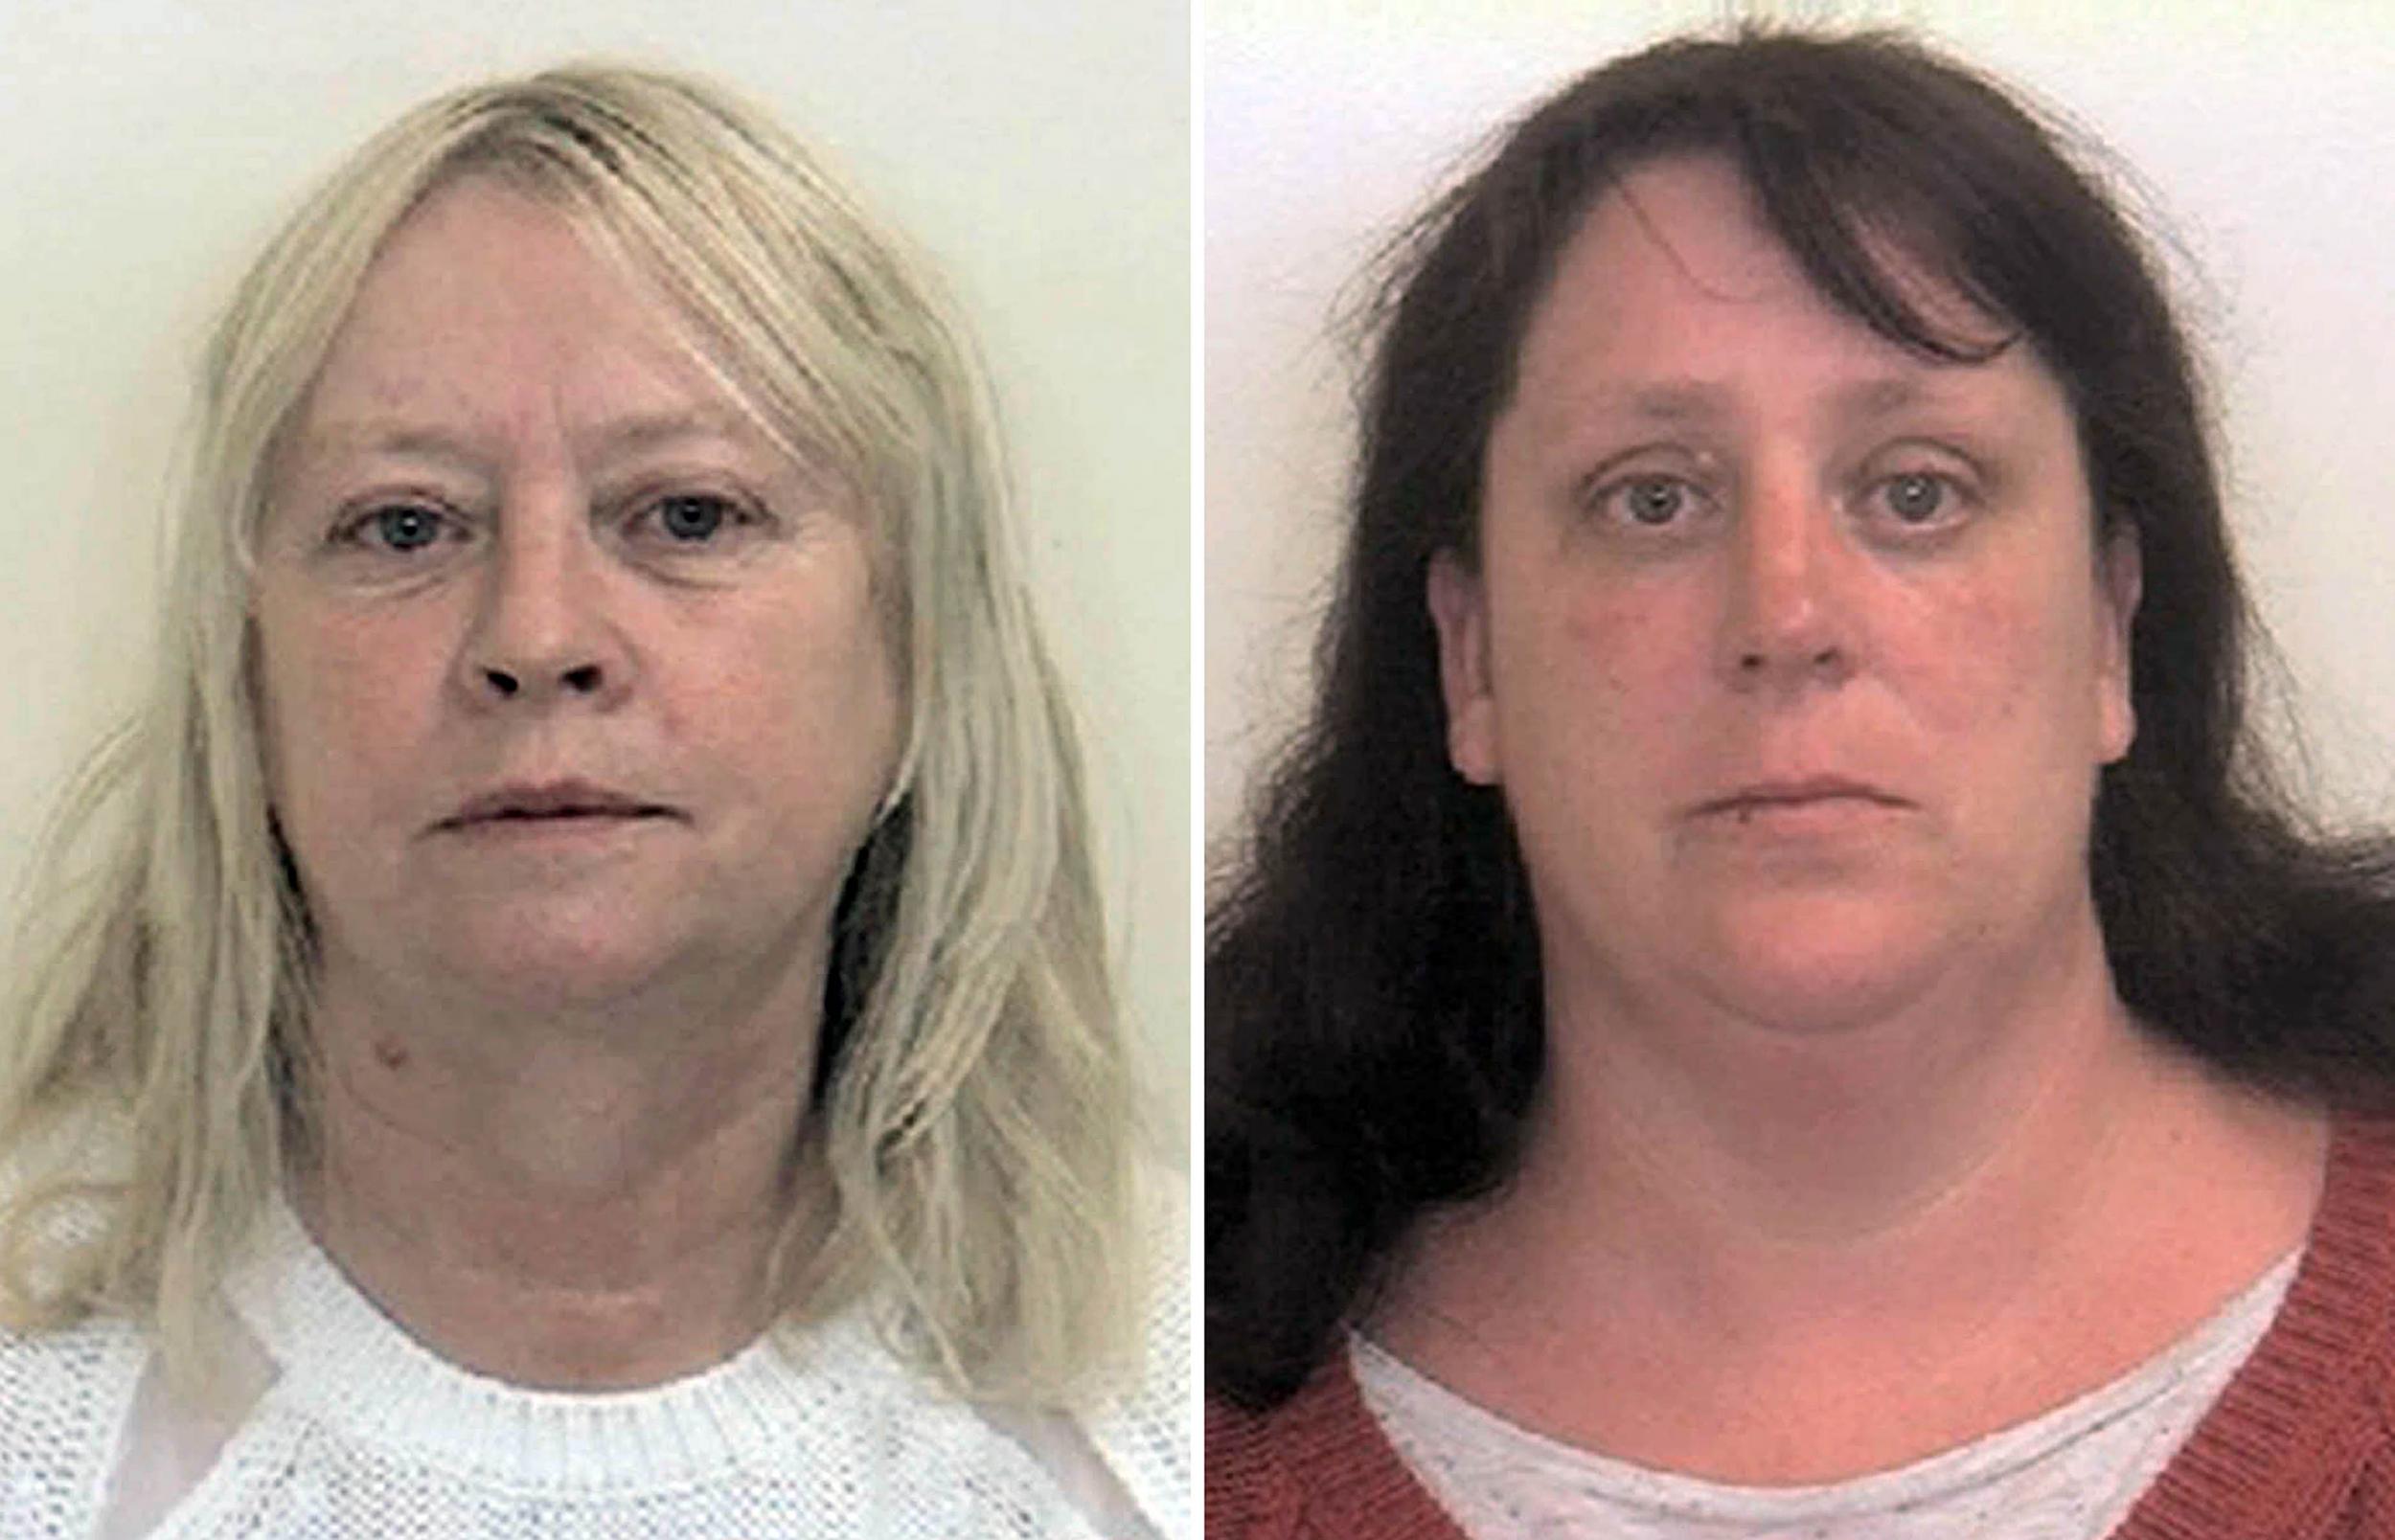 Karen MacGregor, 58, (left) and Shelley Davies, 40, who have been found guilty of conspiracy to procure prostitutes and false imprisonment